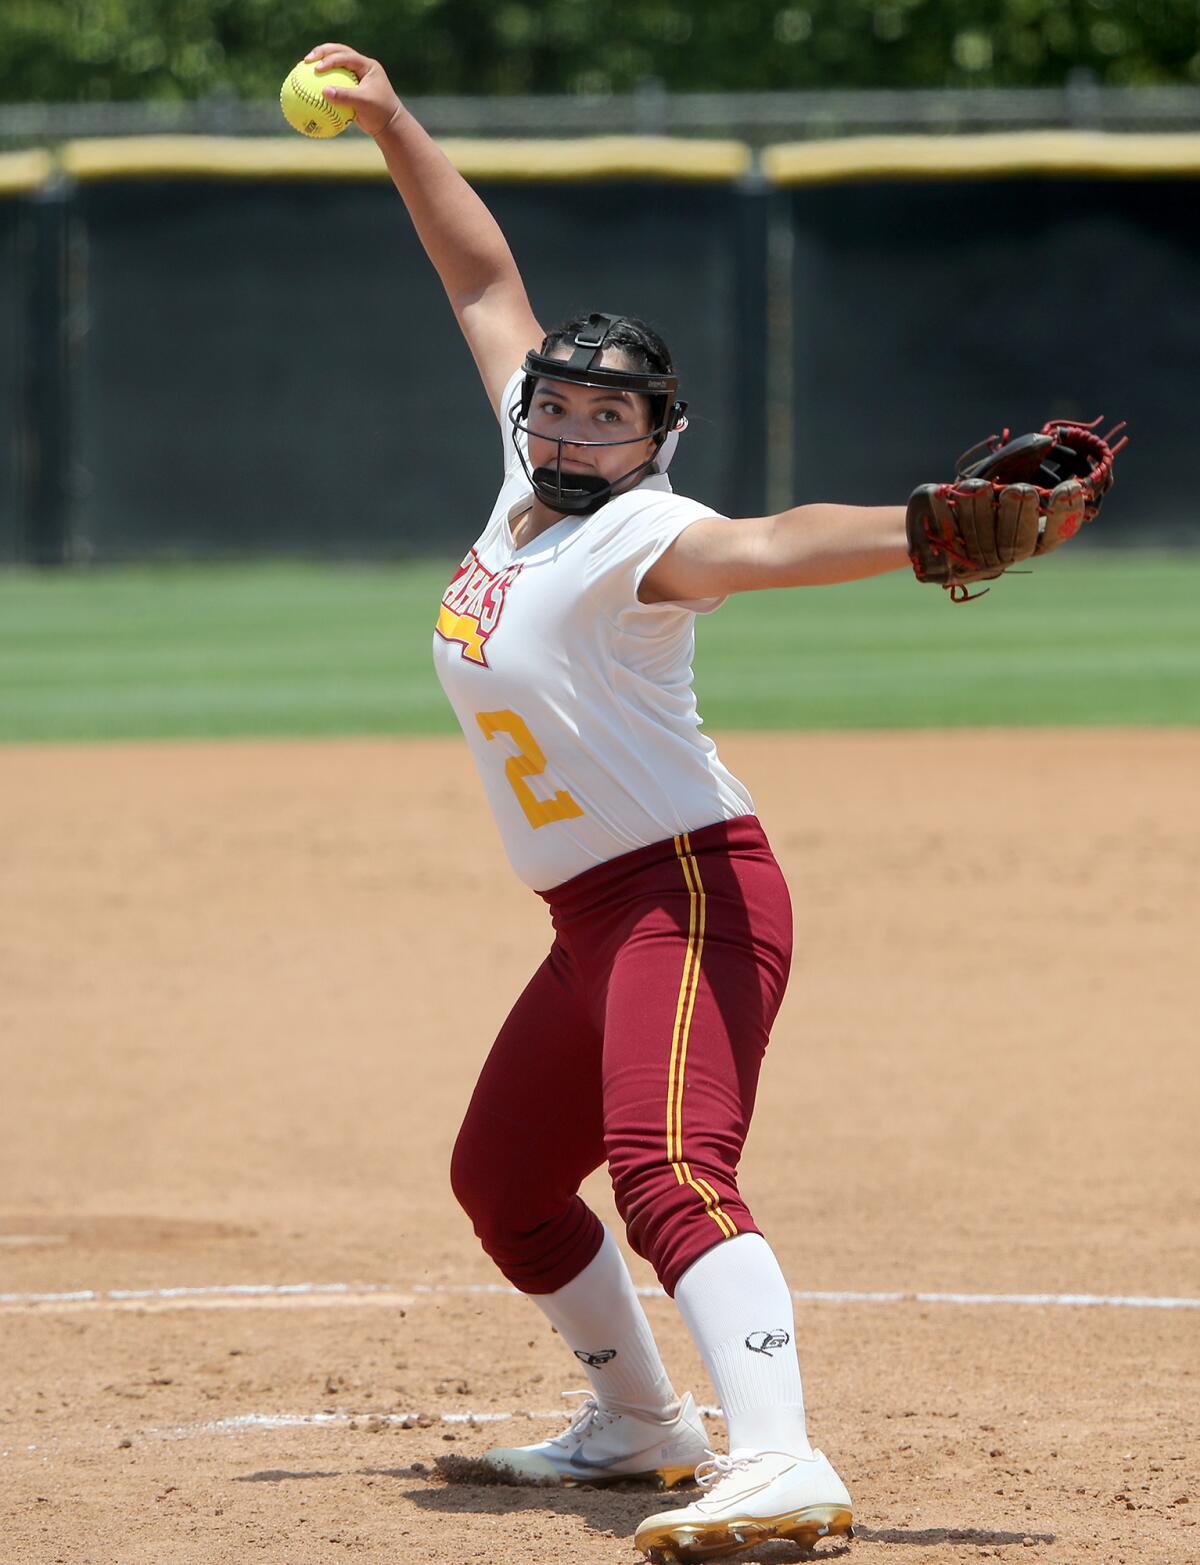 Ocean View senior Desyree Arizmendi pitches during the first inning against Upland Western Christian.